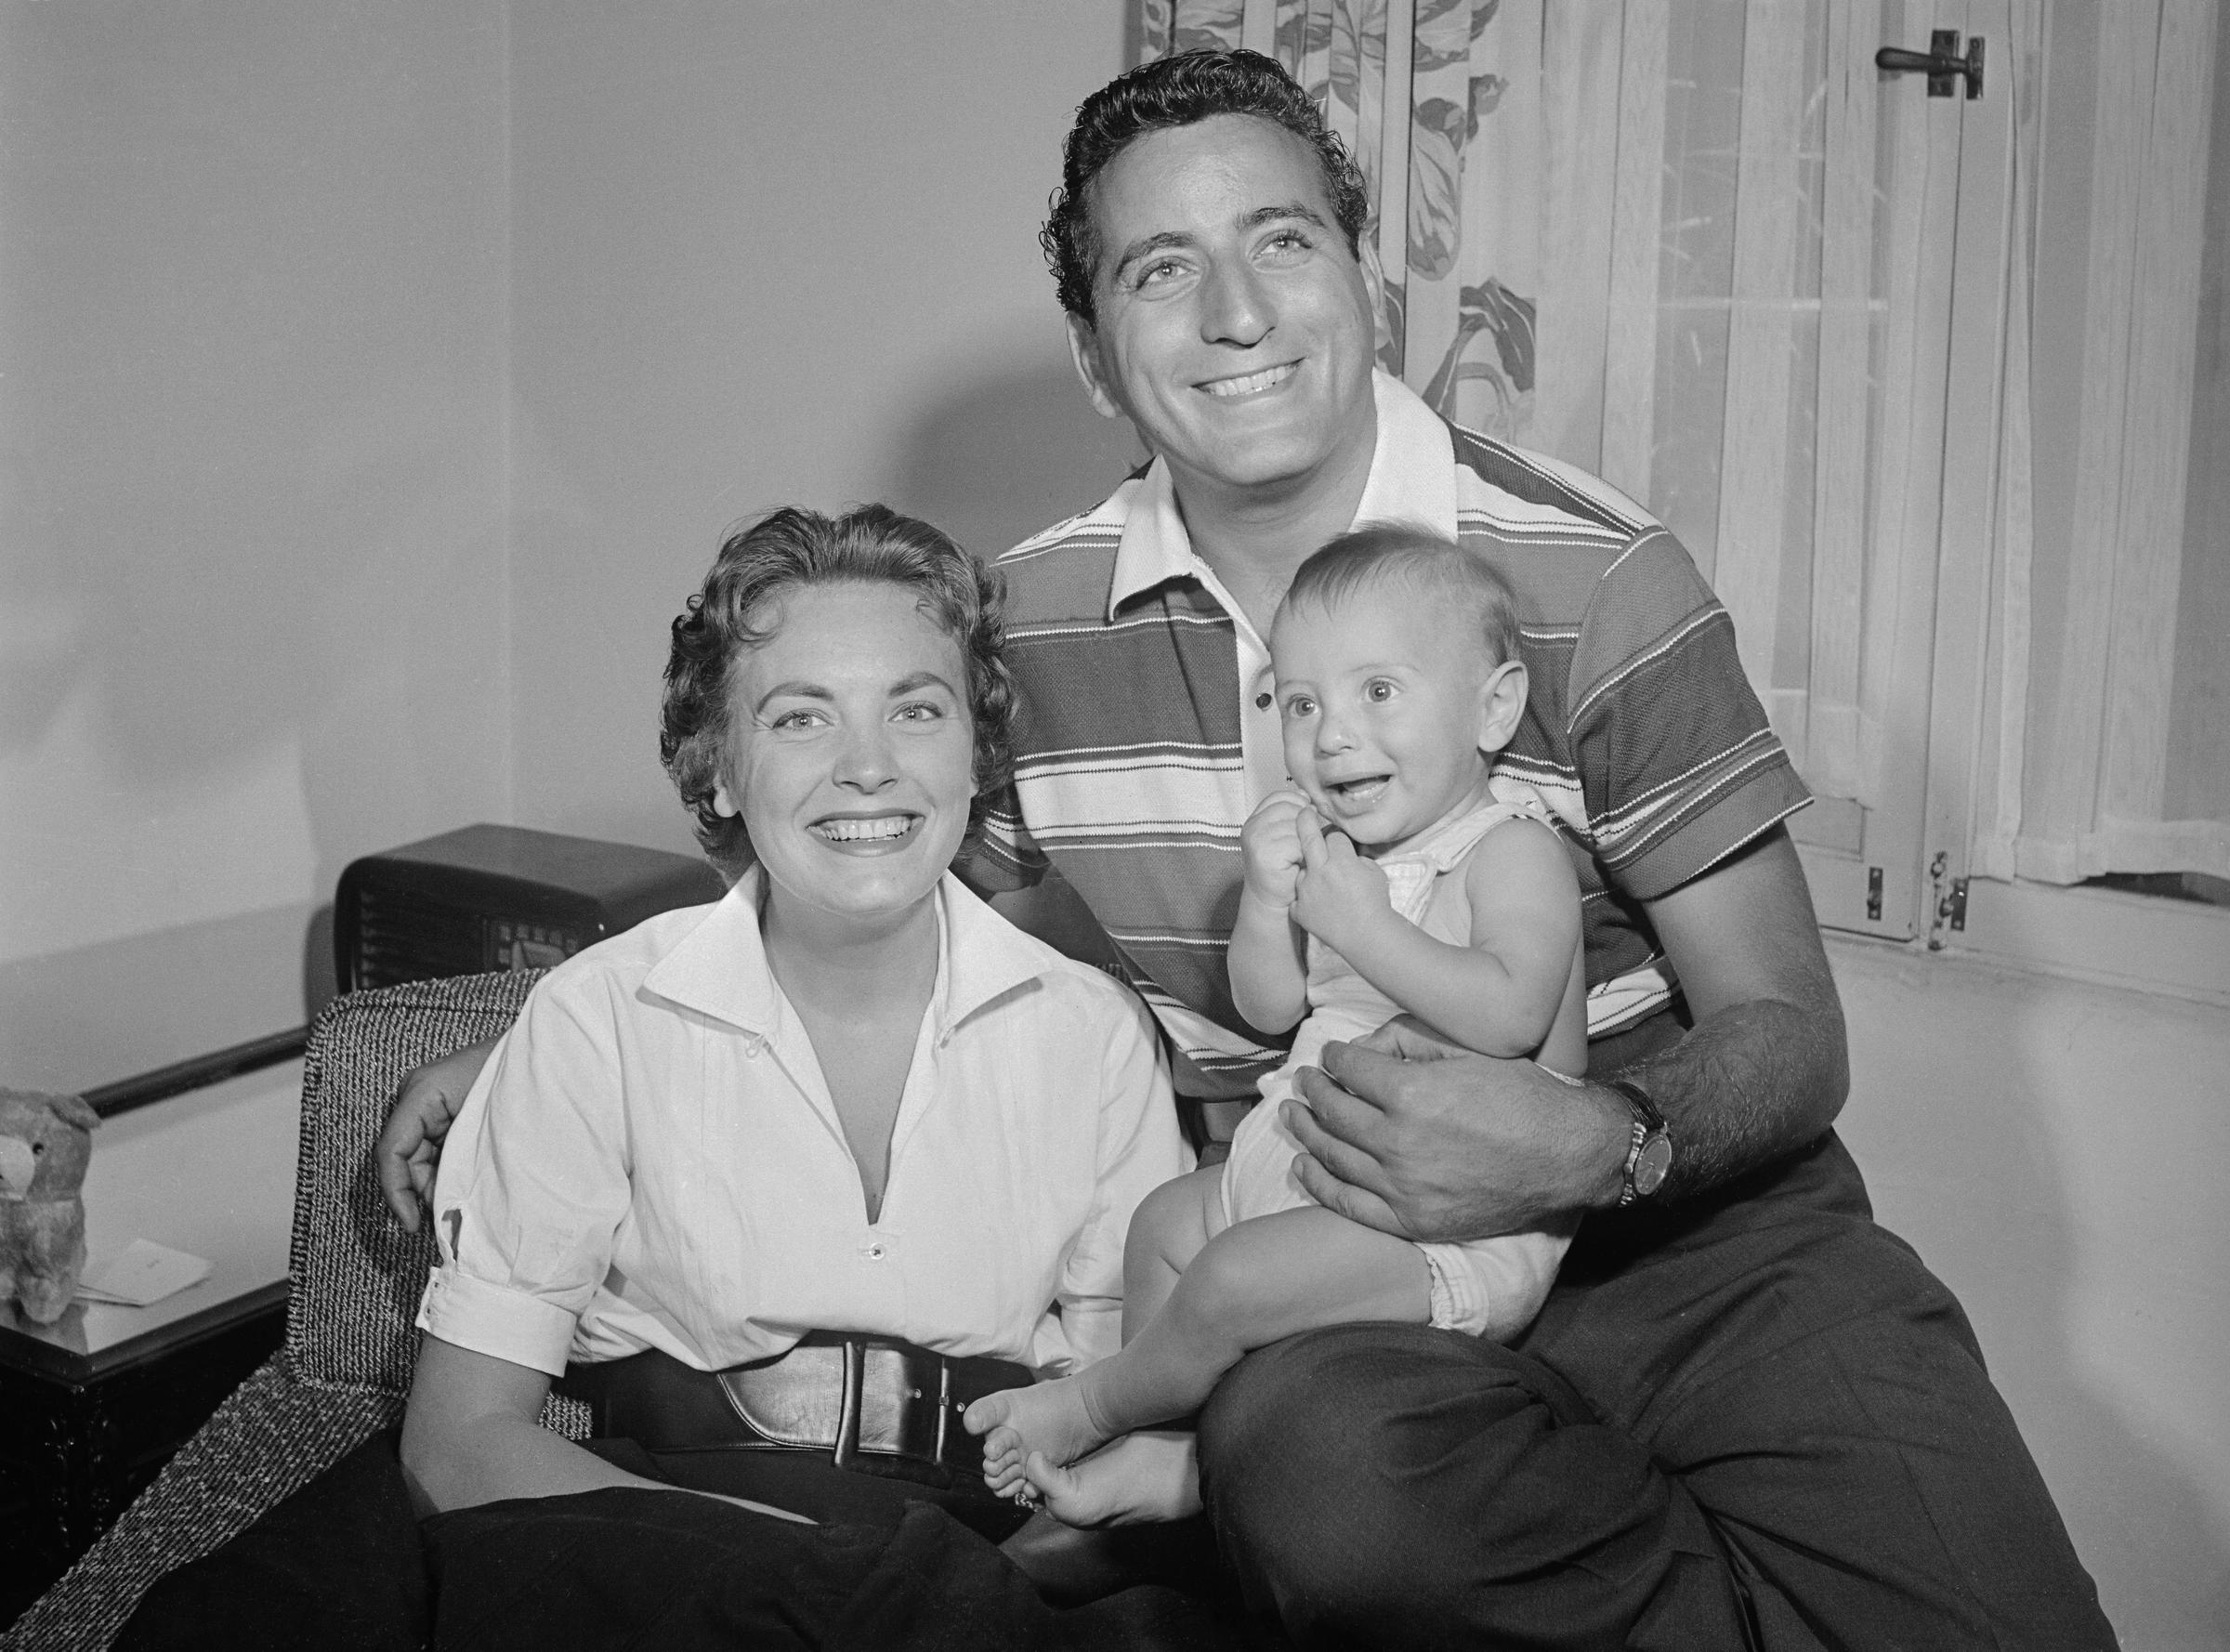 A family portrait of Patricia Beech, Tony Bennett and D'Andrea Bennett. | Source: Getty Images